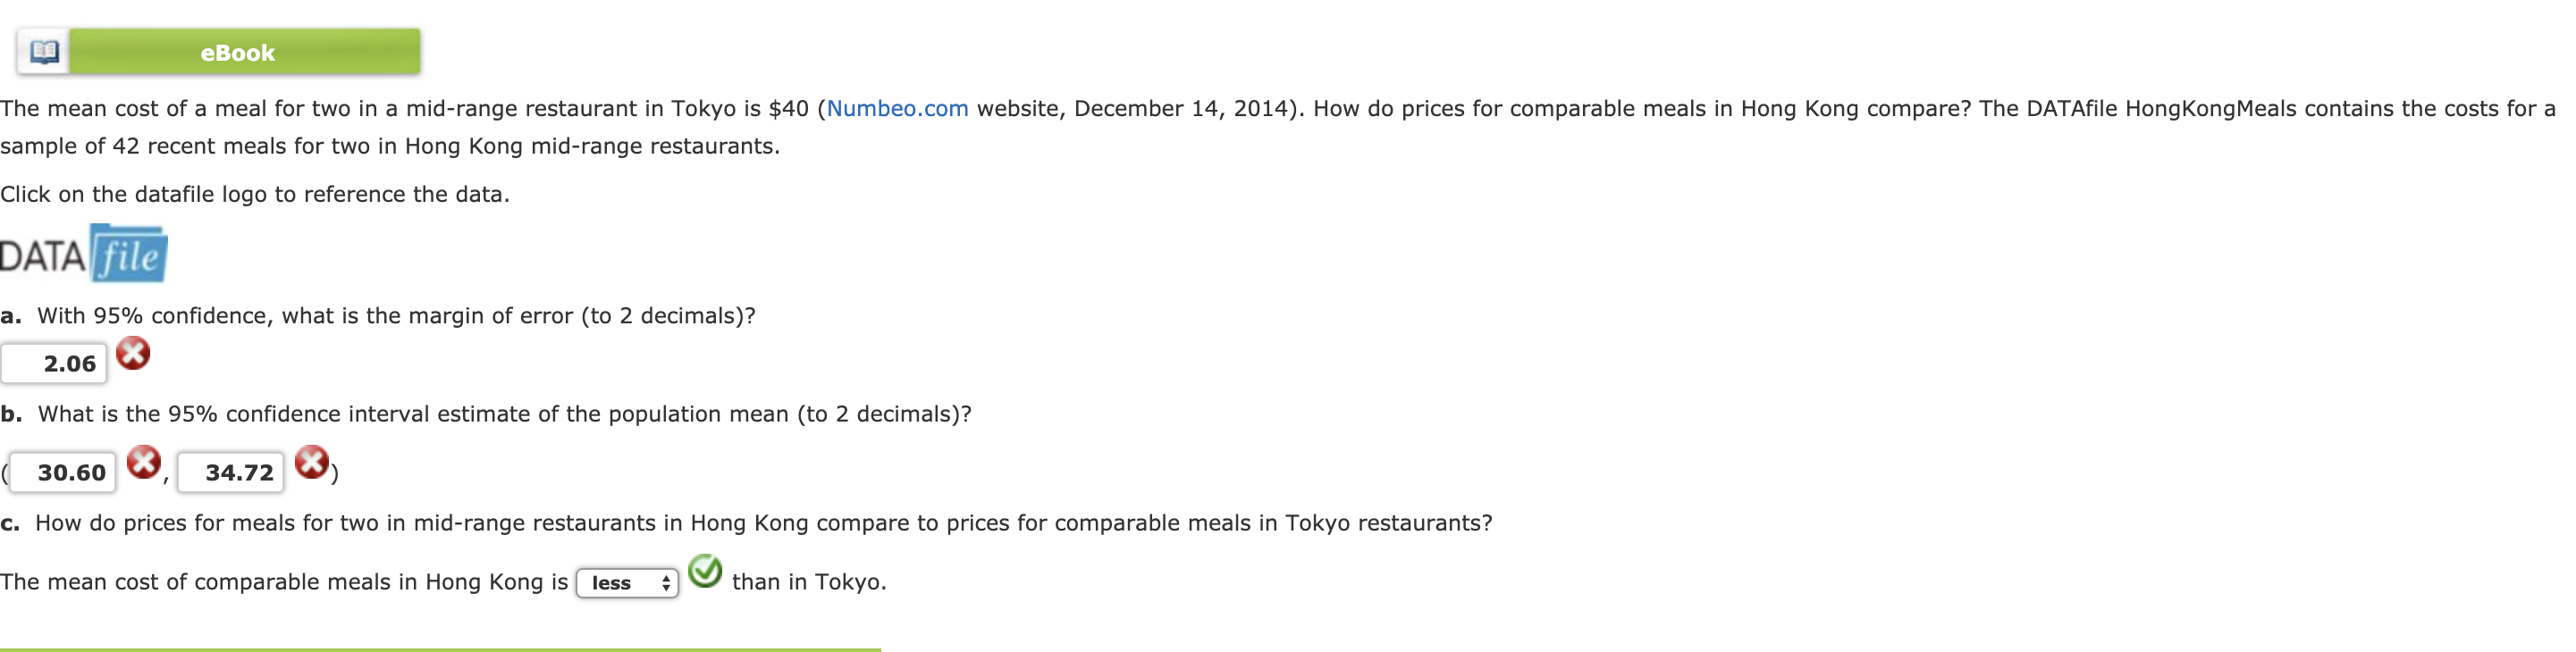 eBook
The mean cost of a meal for two in a mid-range restaurant in Tokyo s串40 Numbeo.com website, December 14, 2014 . How do prices for comparable meals in Hong Kong
sample of 42 recent meals for two in Hong Kong mid-range restaurants.
Click on the datafile logo to reference the data
pare?The DATA e HongKong e sco tans the
ts for a
DATA file
a. with 95% confidence, what is the margin of error (to 2 decimals)?
2.06
b. What is the 95% confidence interval estimate of the population mean (to 2 decimals)?
30.60, 34.72 3
c. How do prices for meals for two in mid-range restaurants in Hong Kong compare to prices for comparable meals in Tokyo restaurants?
The mean cost of comparable meals in Hong Kong is less
than in Tokyo.
